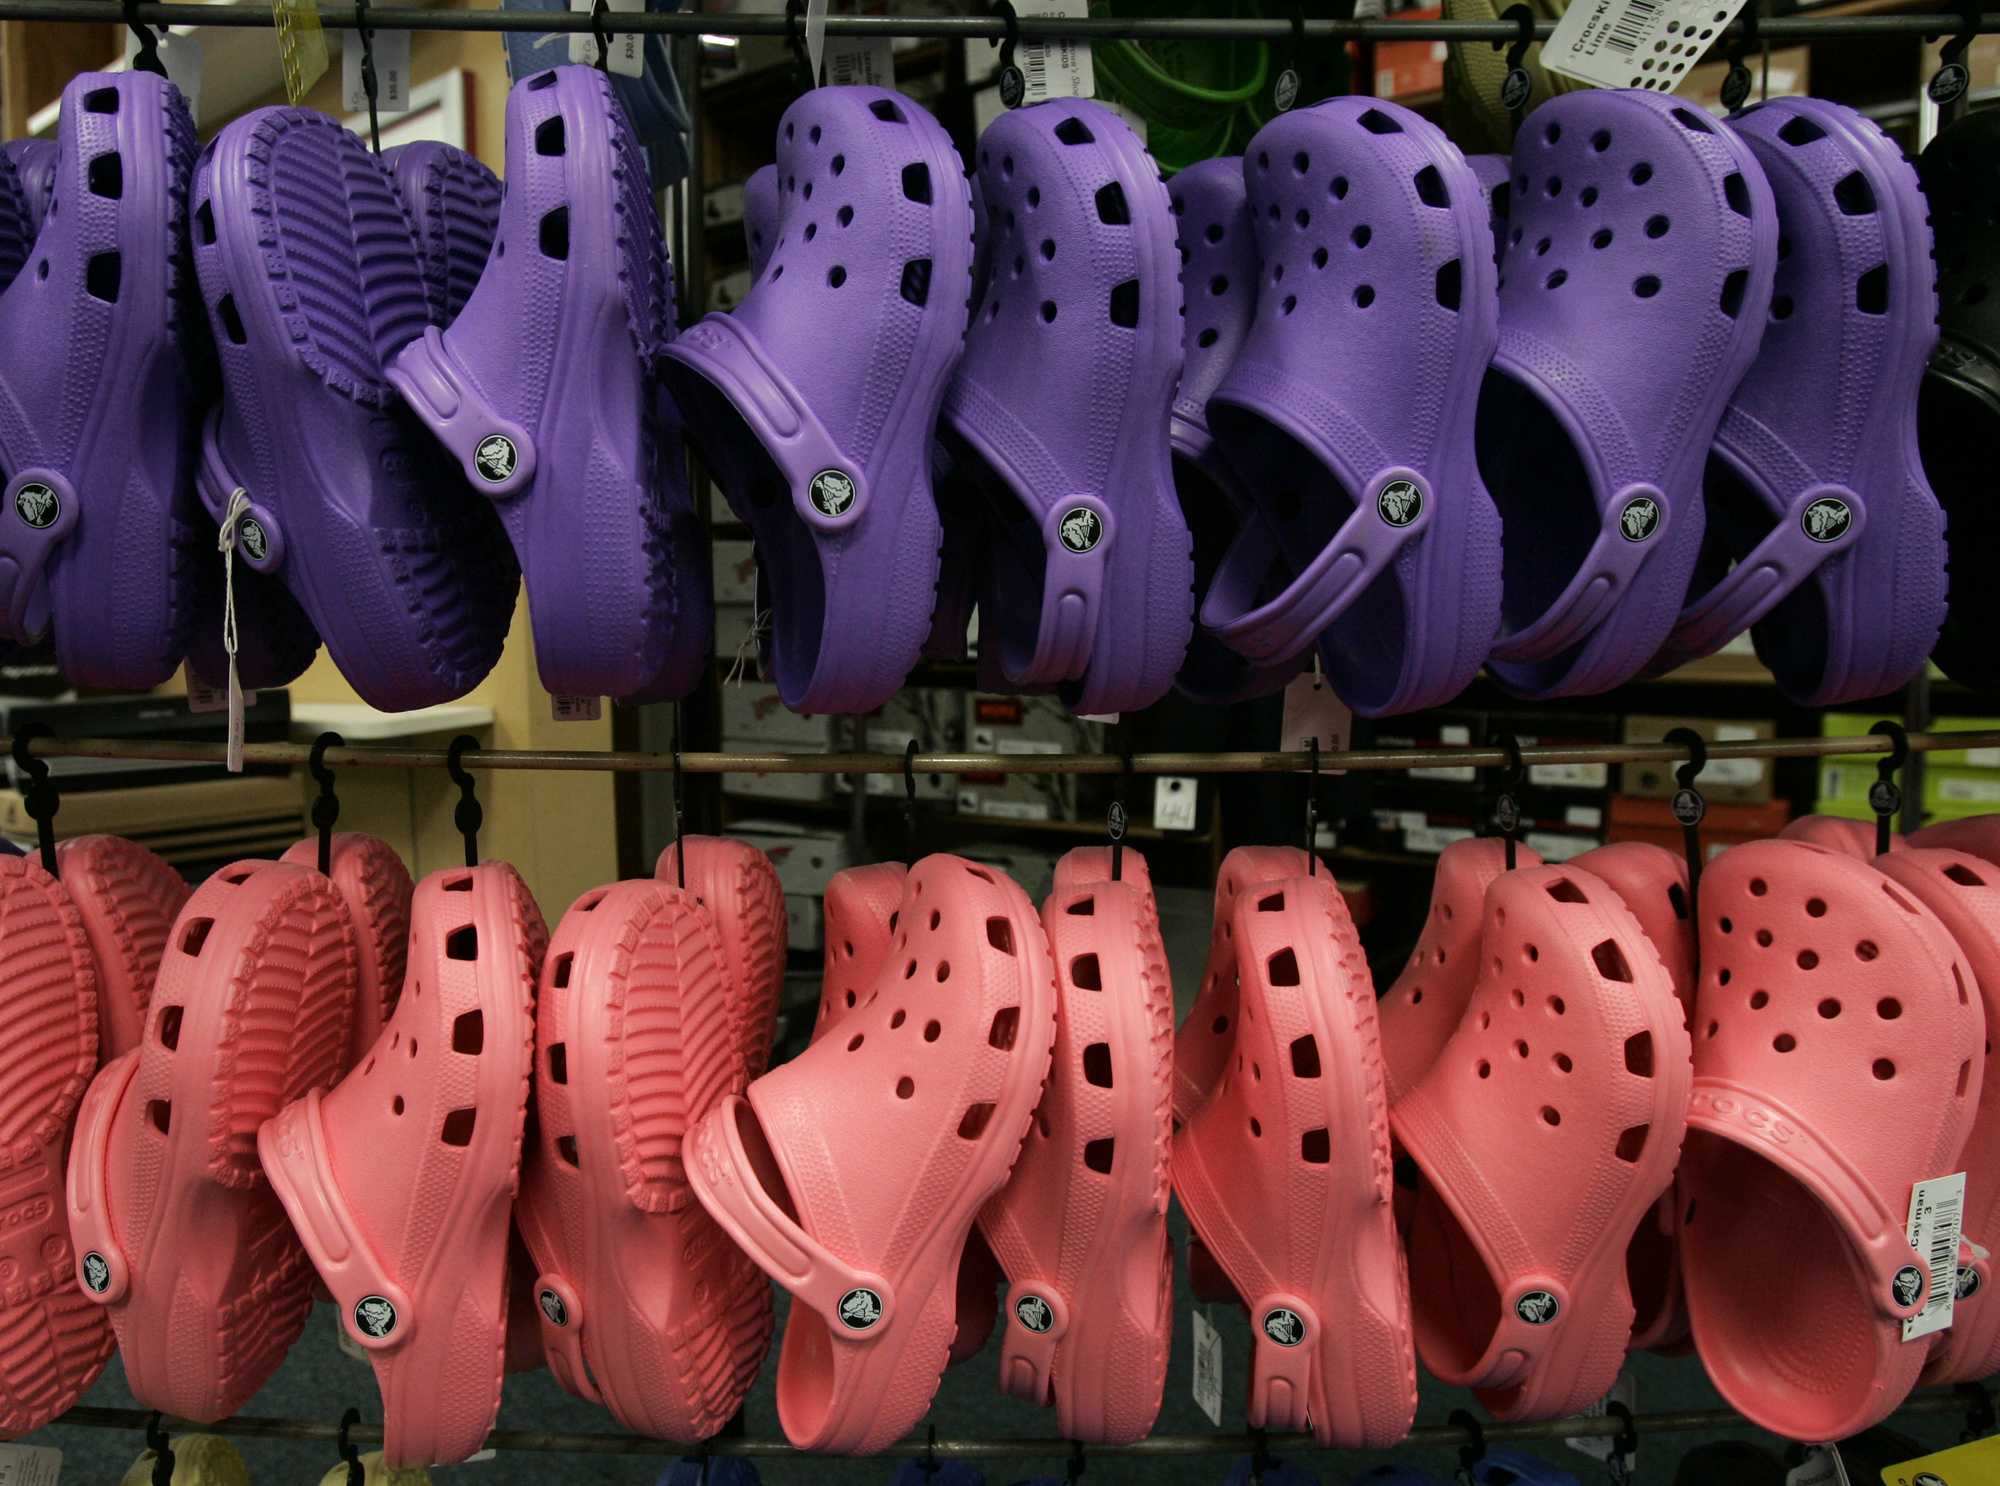 Croctober Crocs launches weeklong free pairs of shoes giveaway for all